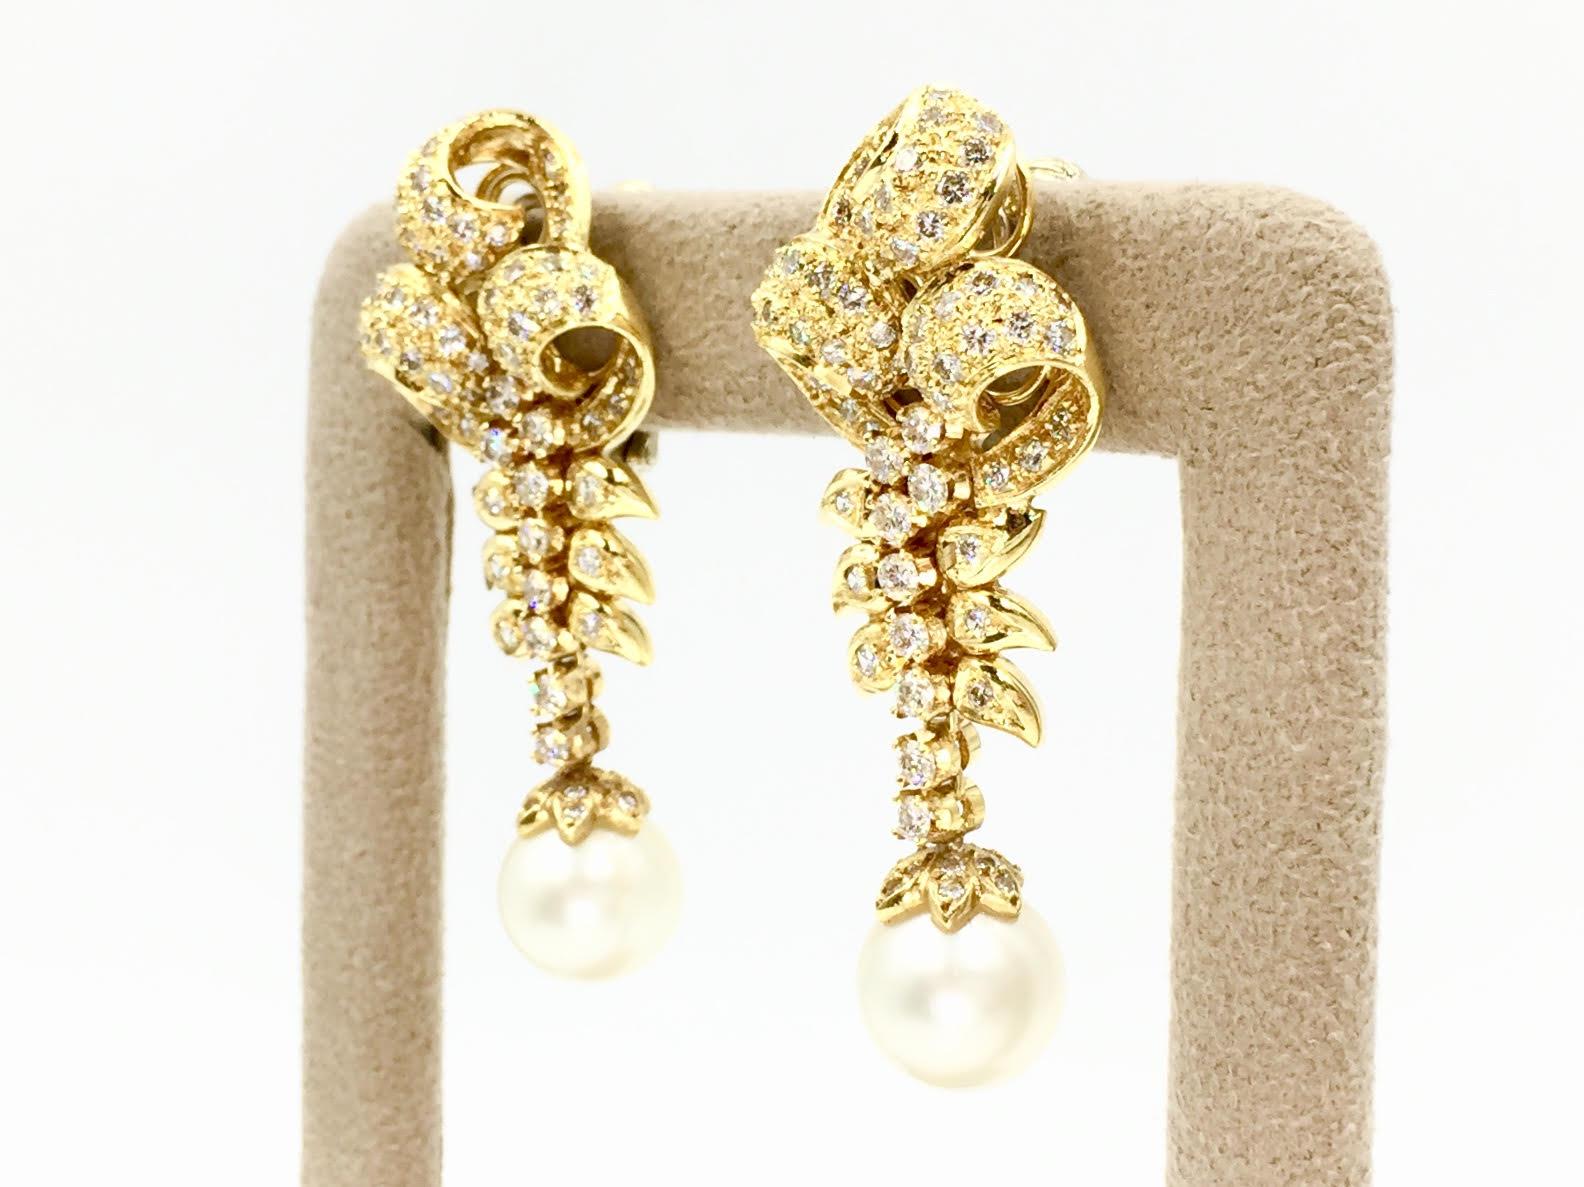 18 Karat Vintage Diamond and Pearl Drop Earrings In Excellent Condition For Sale In Pikesville, MD